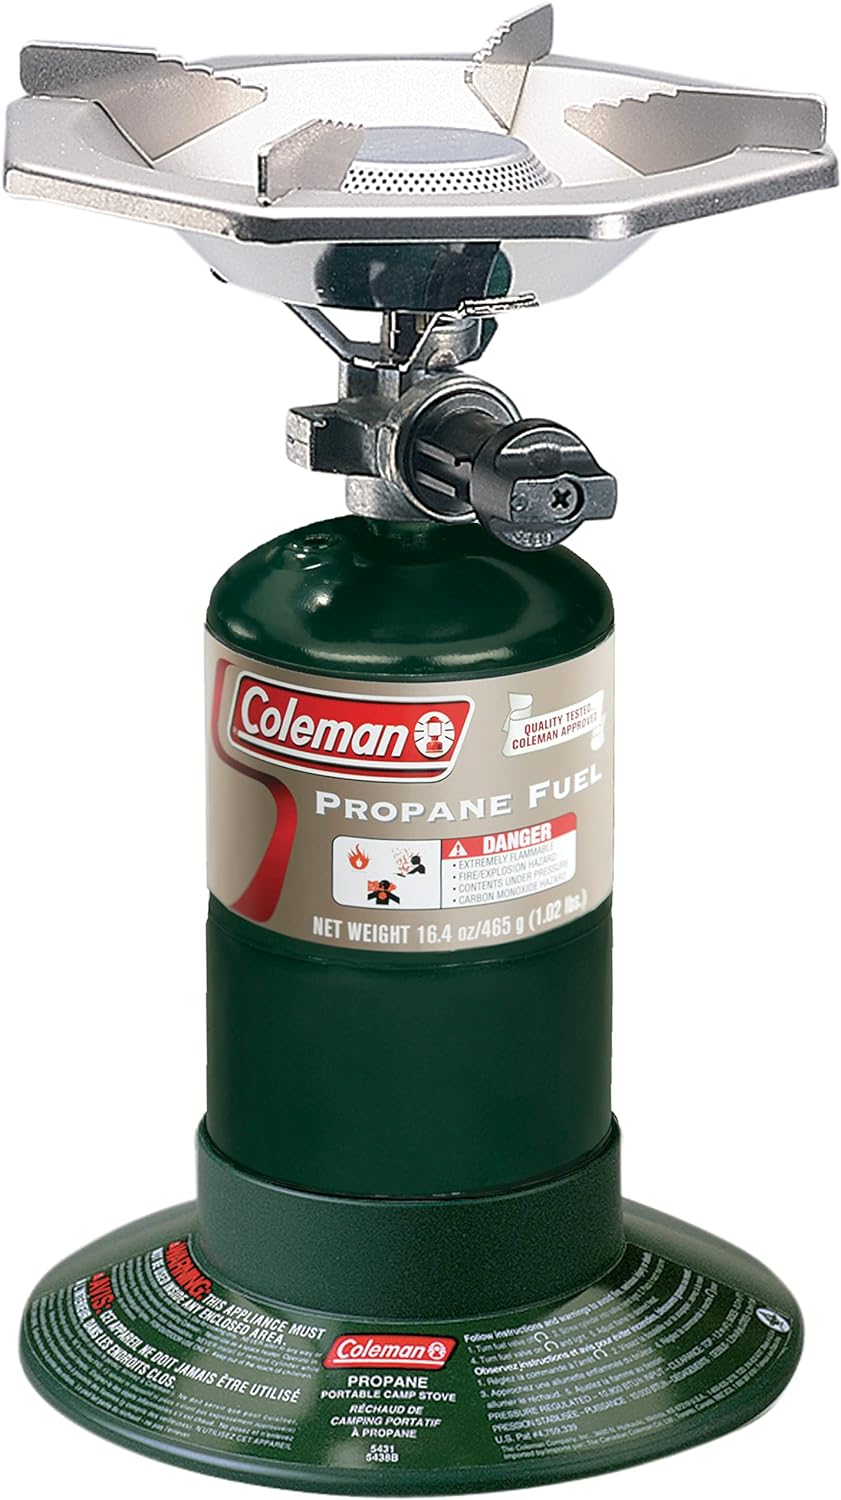 Coleman Bottletop Propane Camping Stove Review